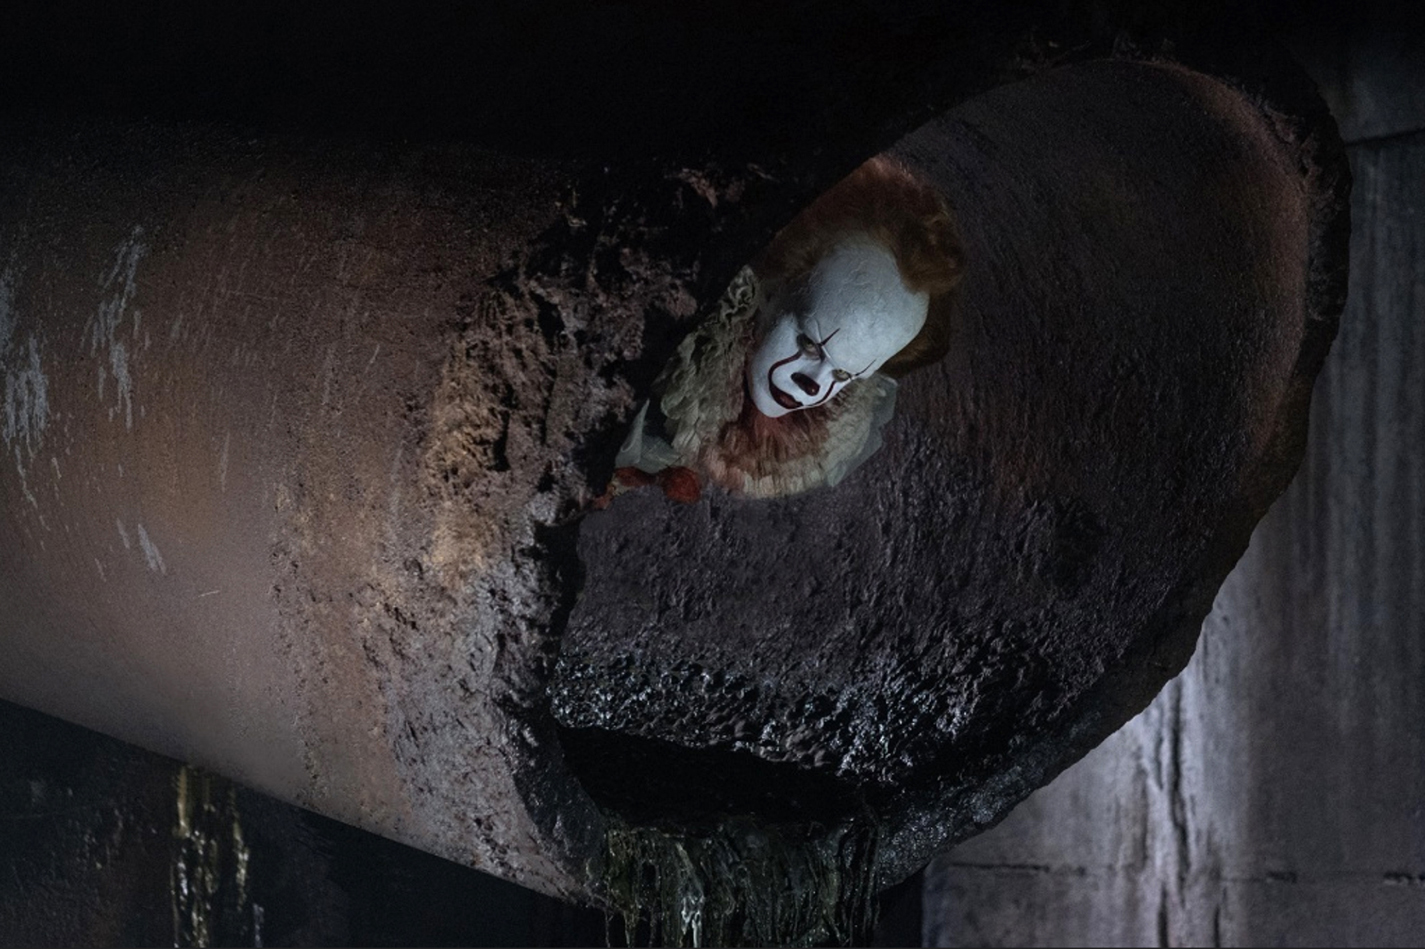 Pennywise the Dancing Clown appears every 27 years in Derry, Maine in Stephen King’s It.